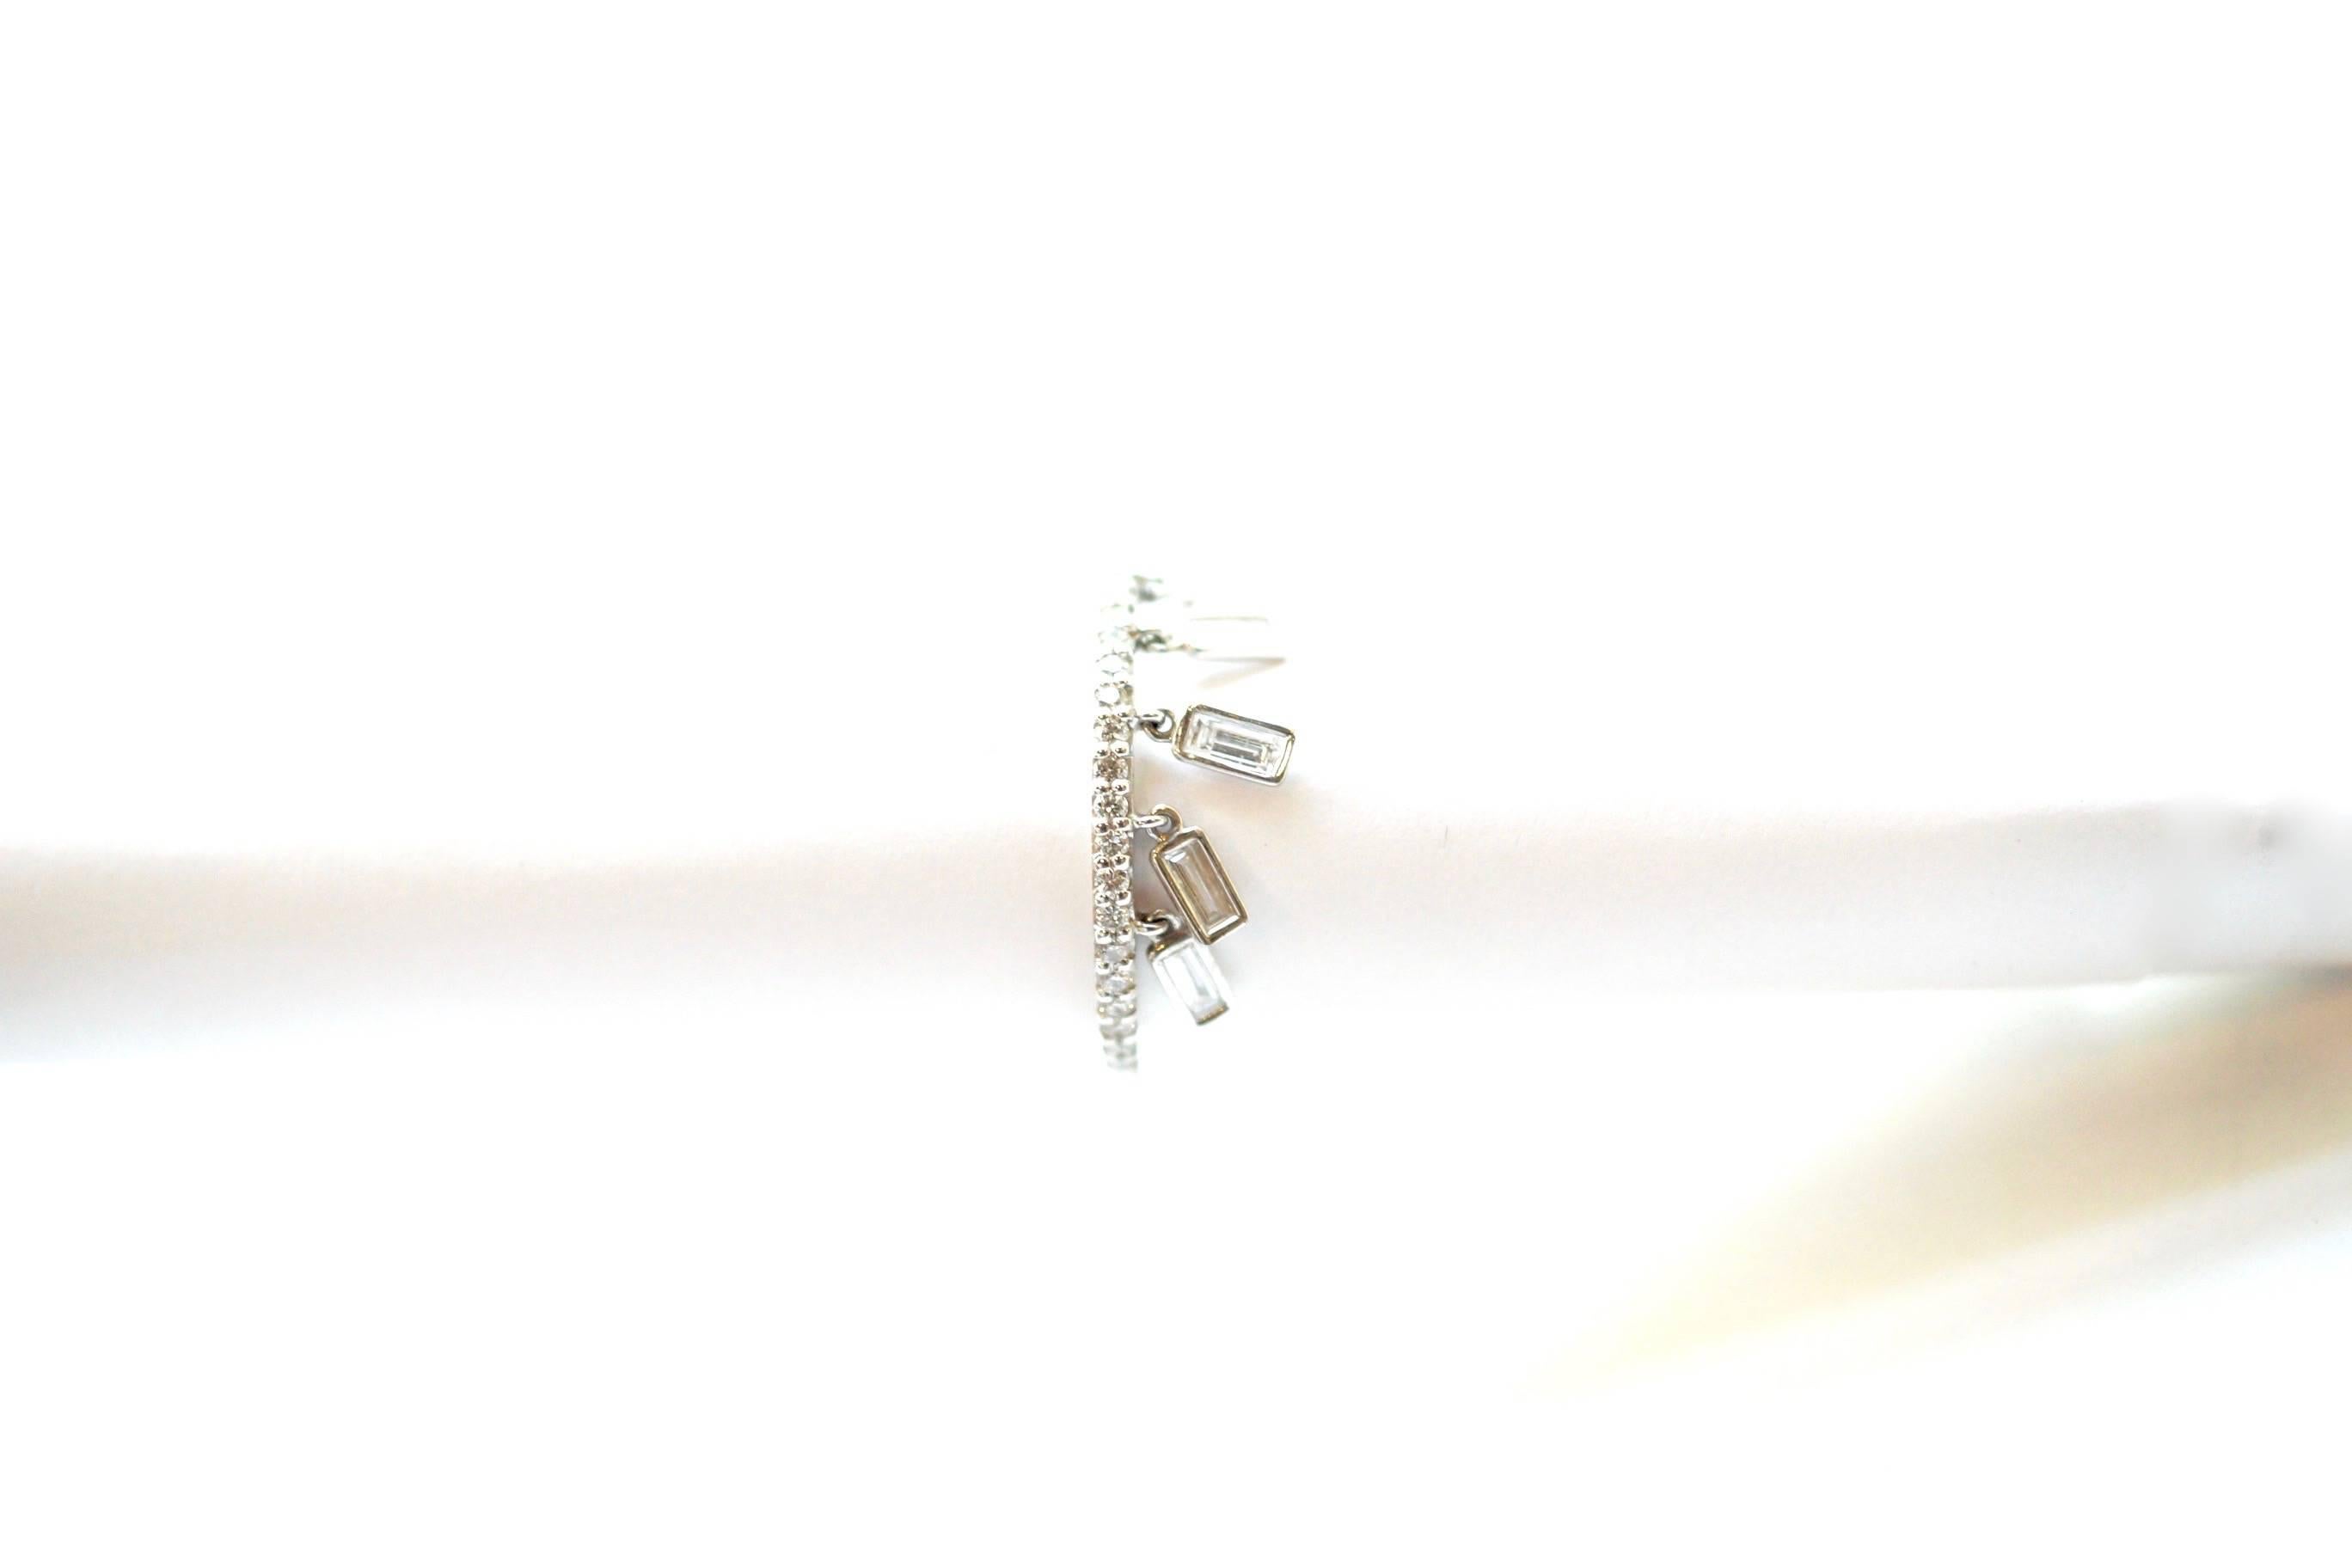 Shimmee® Ring
A platinum ring set ¾ of the way with white diamonds.  Suspended unpredictably off one side of the ring are five flexible white diamond baguettes.  This modest movement adds discreet glitter to the diamonds.  
Size 6 - adjustable upon